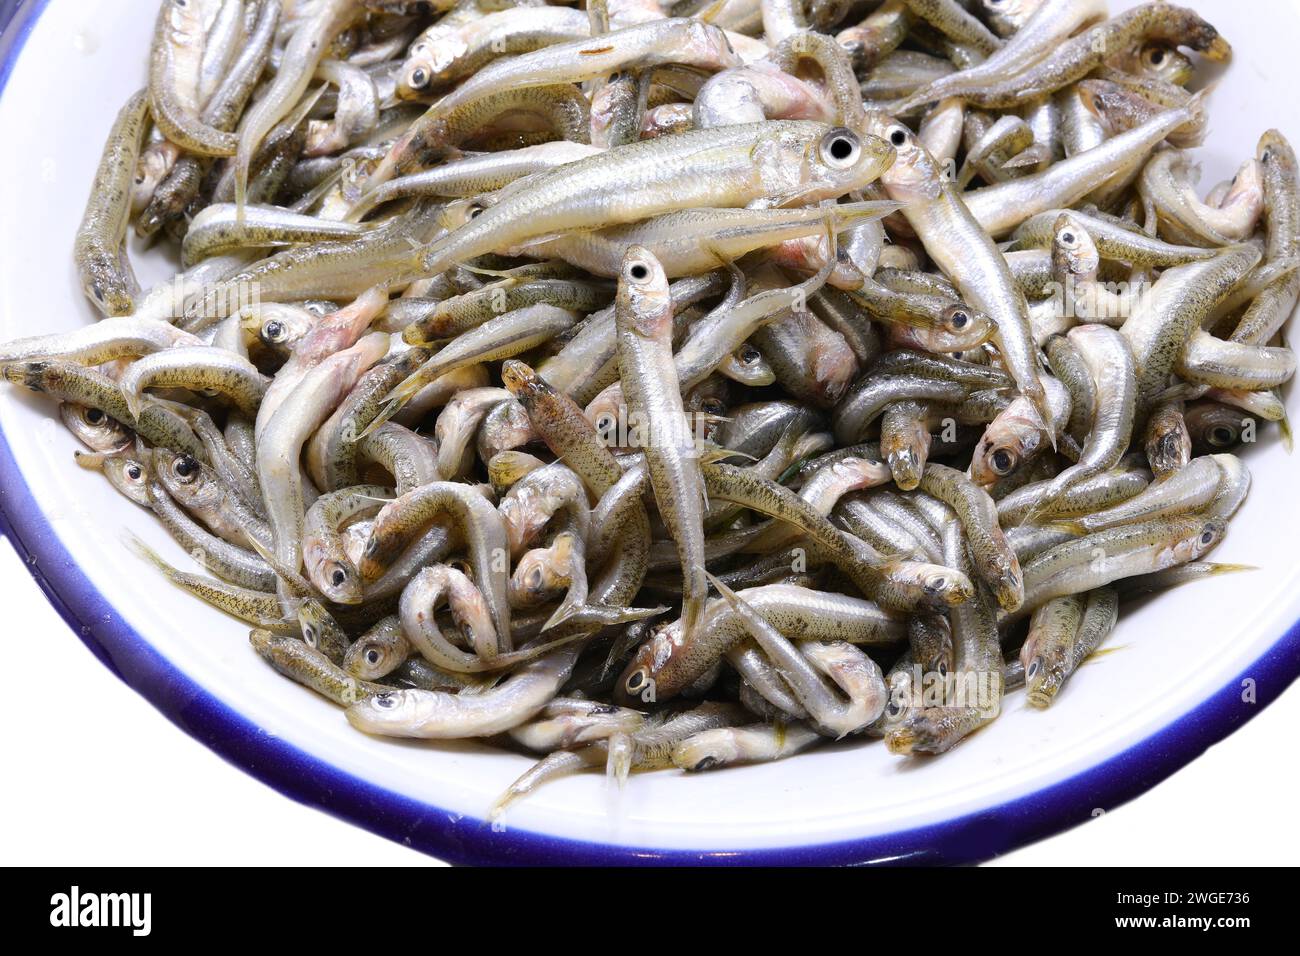 dish with many caught fish called sand smelt of  the family Atherinidae  are very appreciated in the Italian and mediterranean cuisine Stock Photo